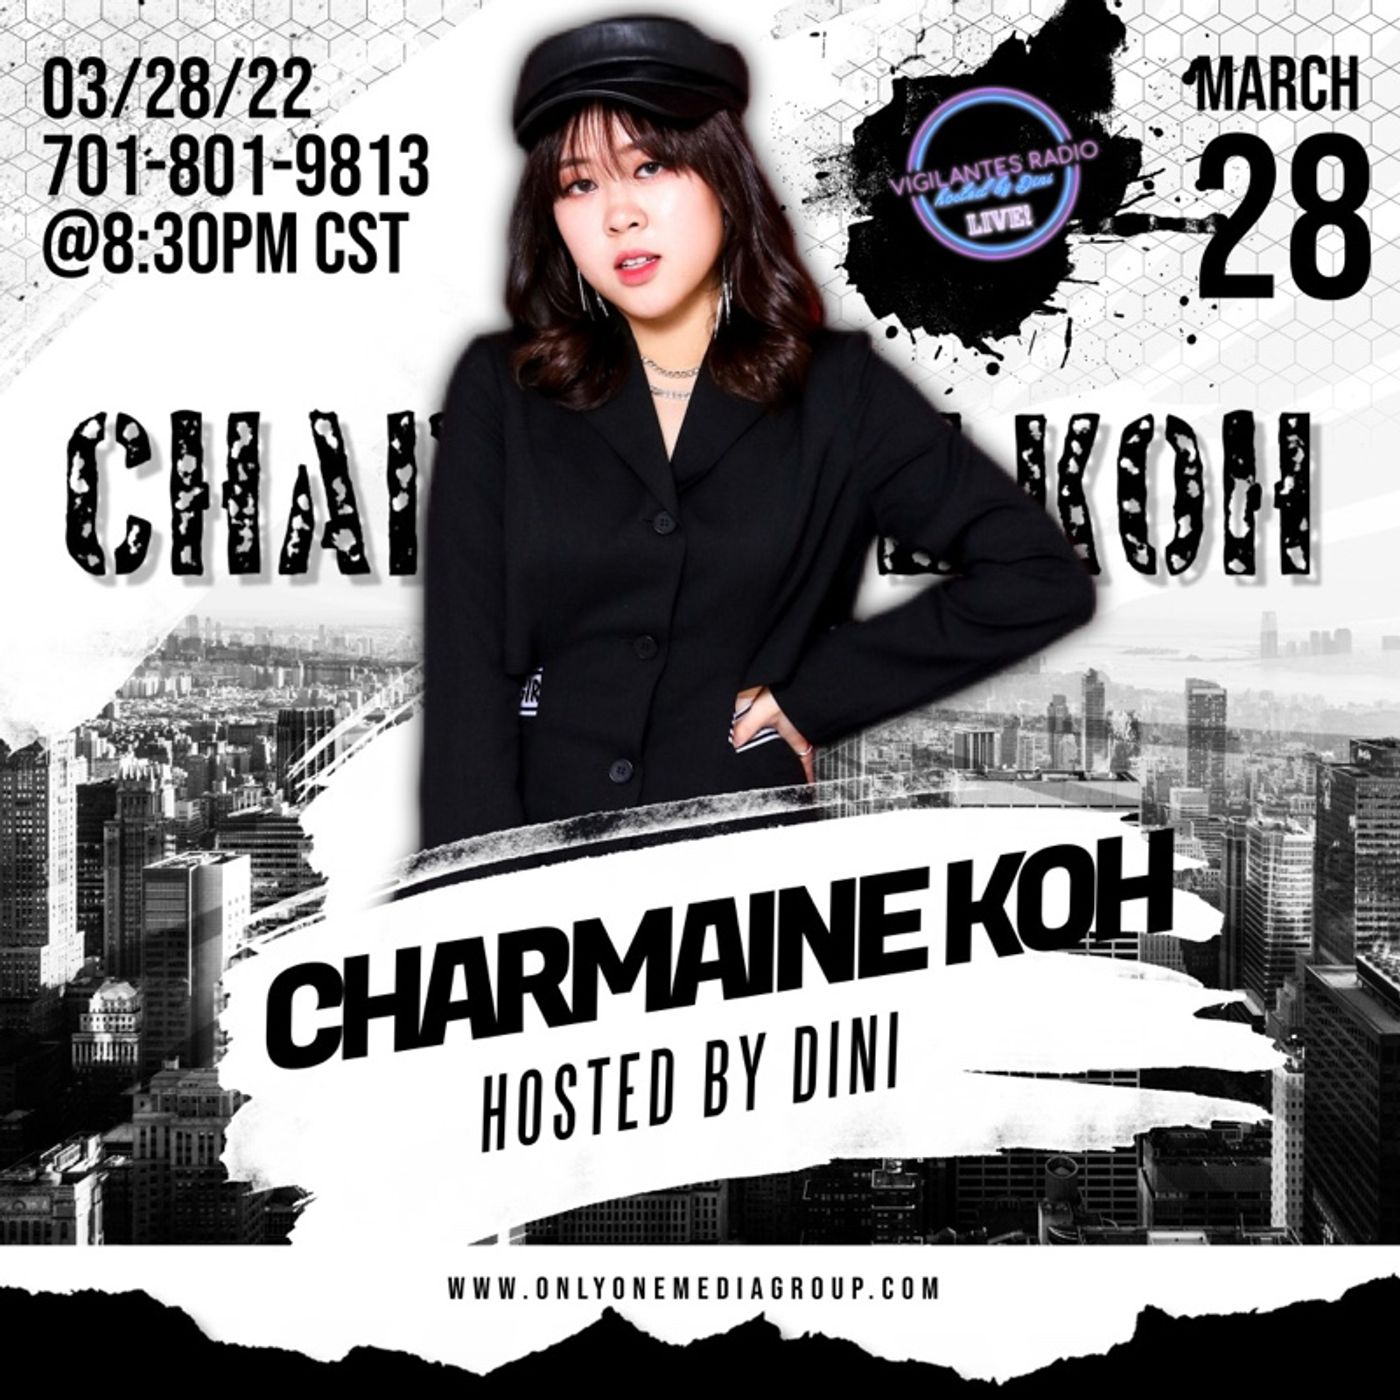 The Charmaine Koh Interview. Image